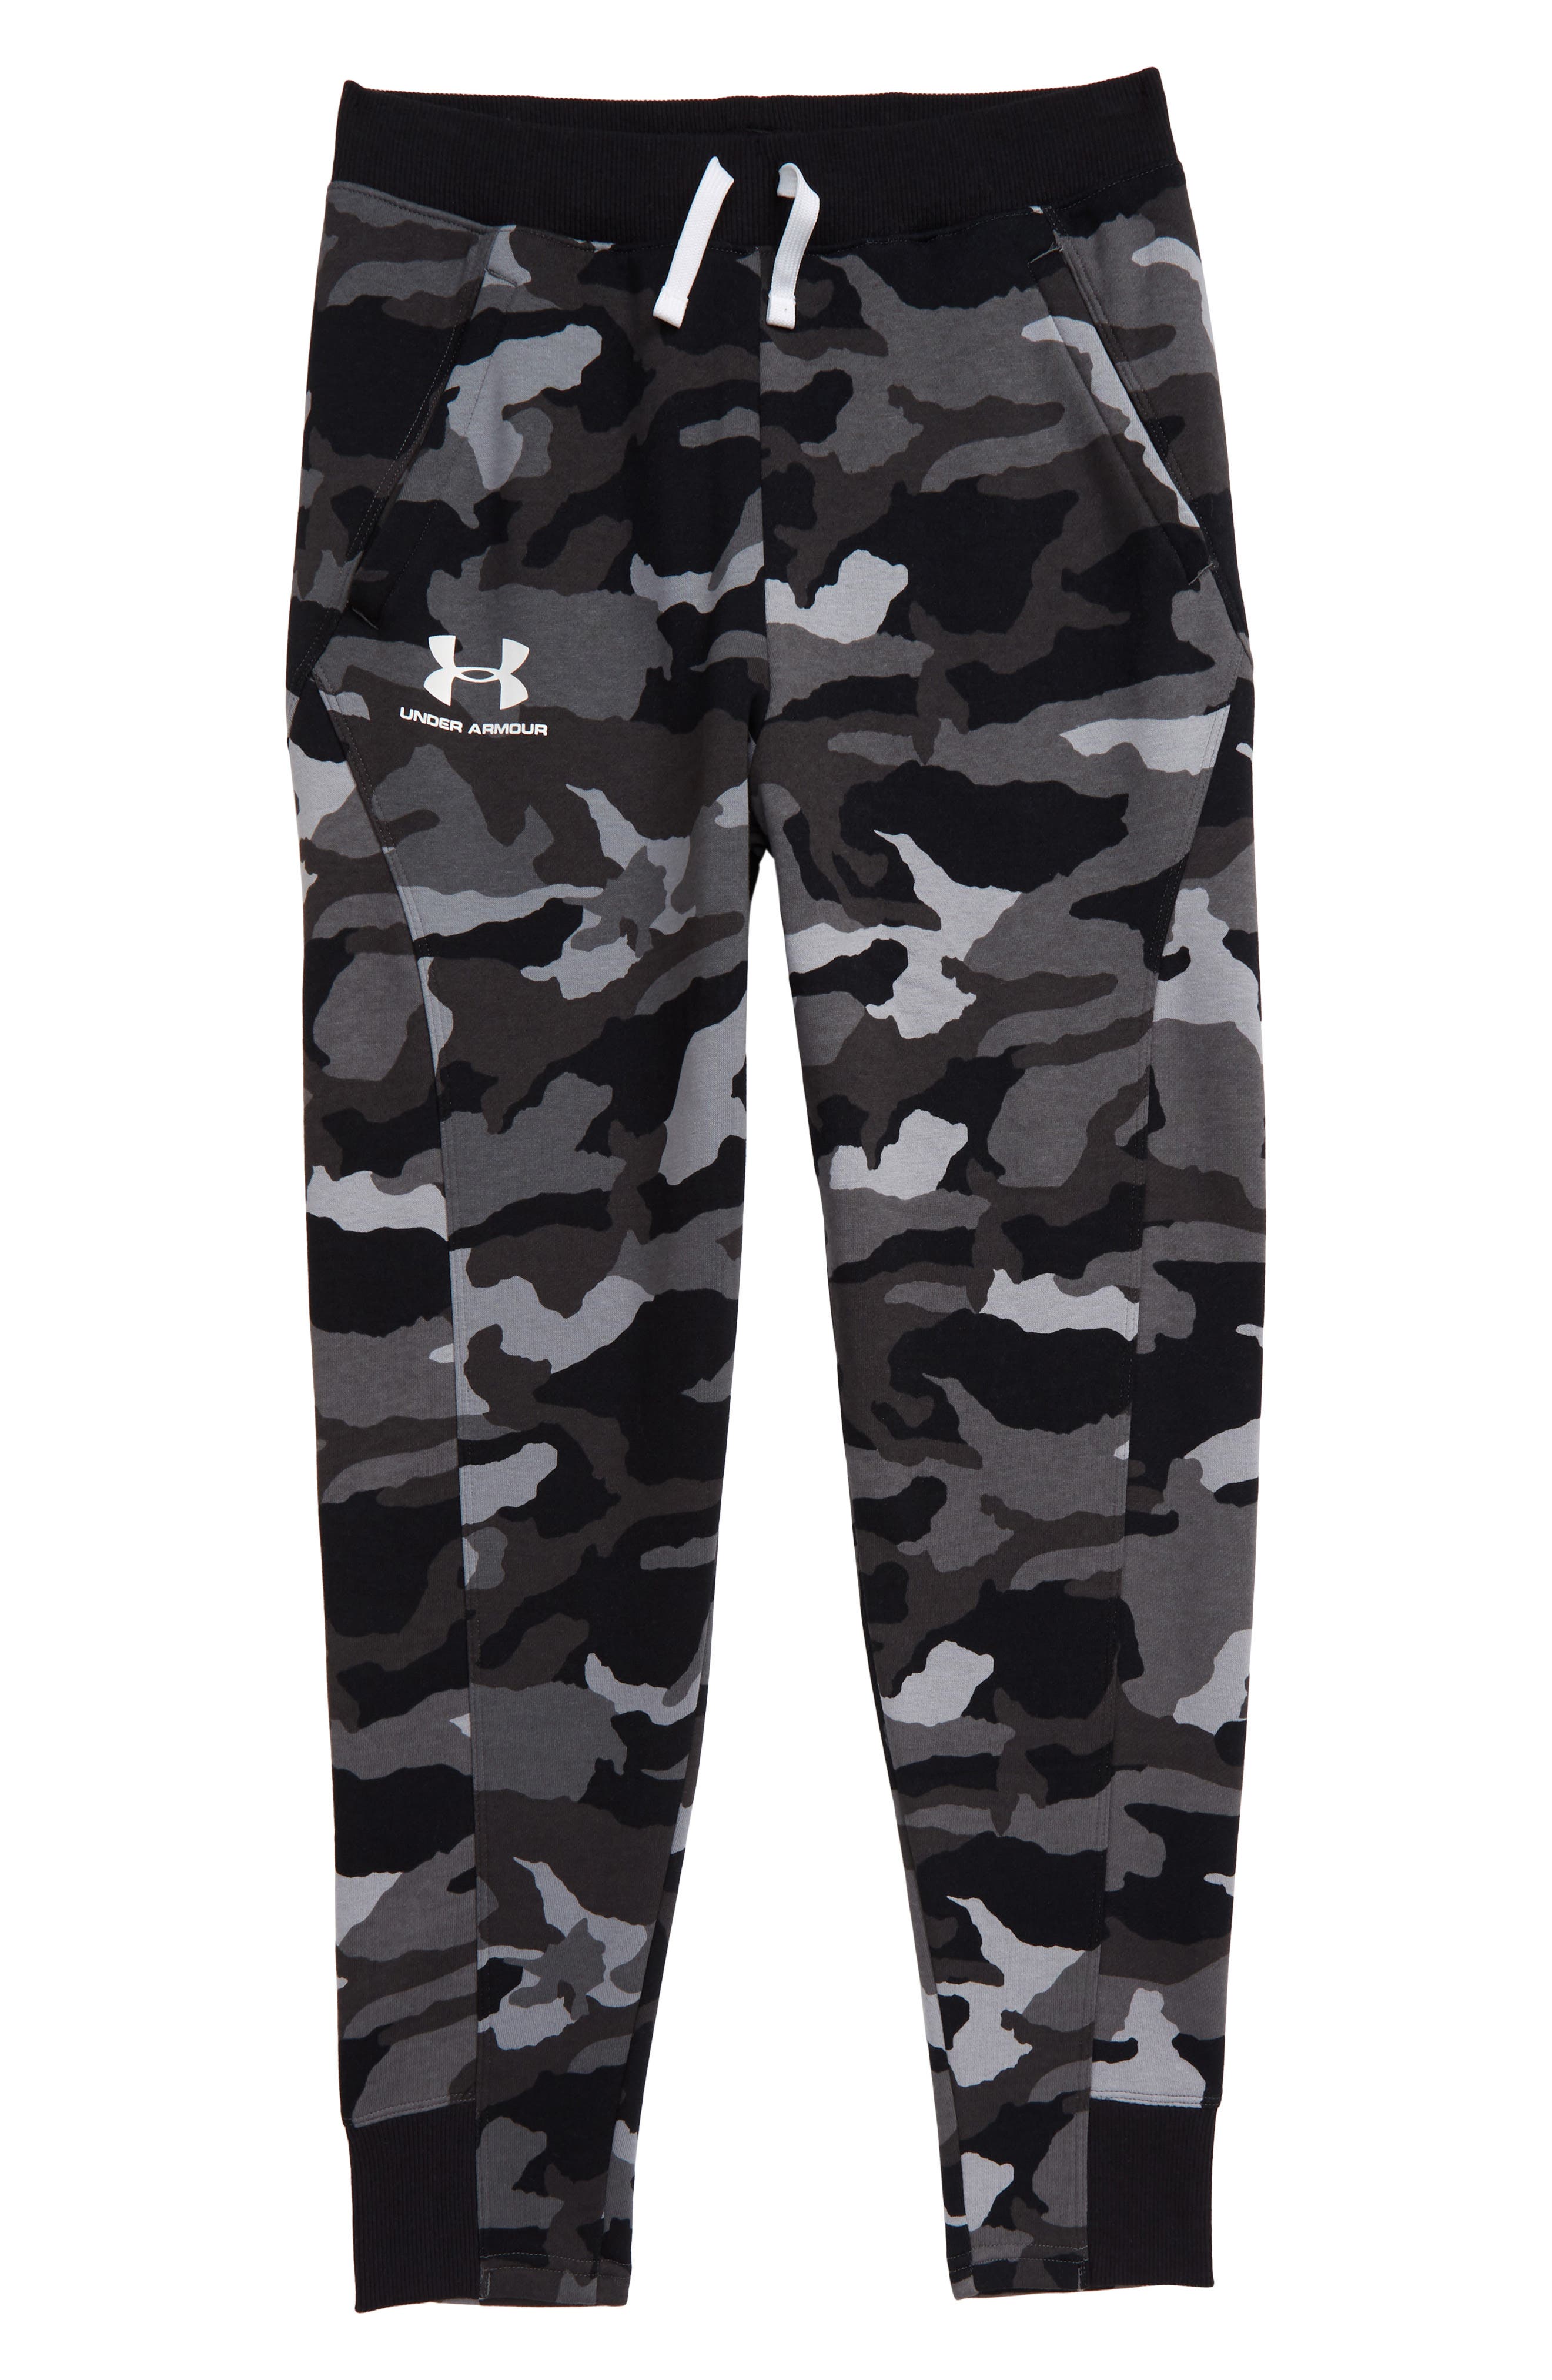 Under Armour Cold Gear Infrared Camo Hunting Pants 1247104-340 Size Large Women 